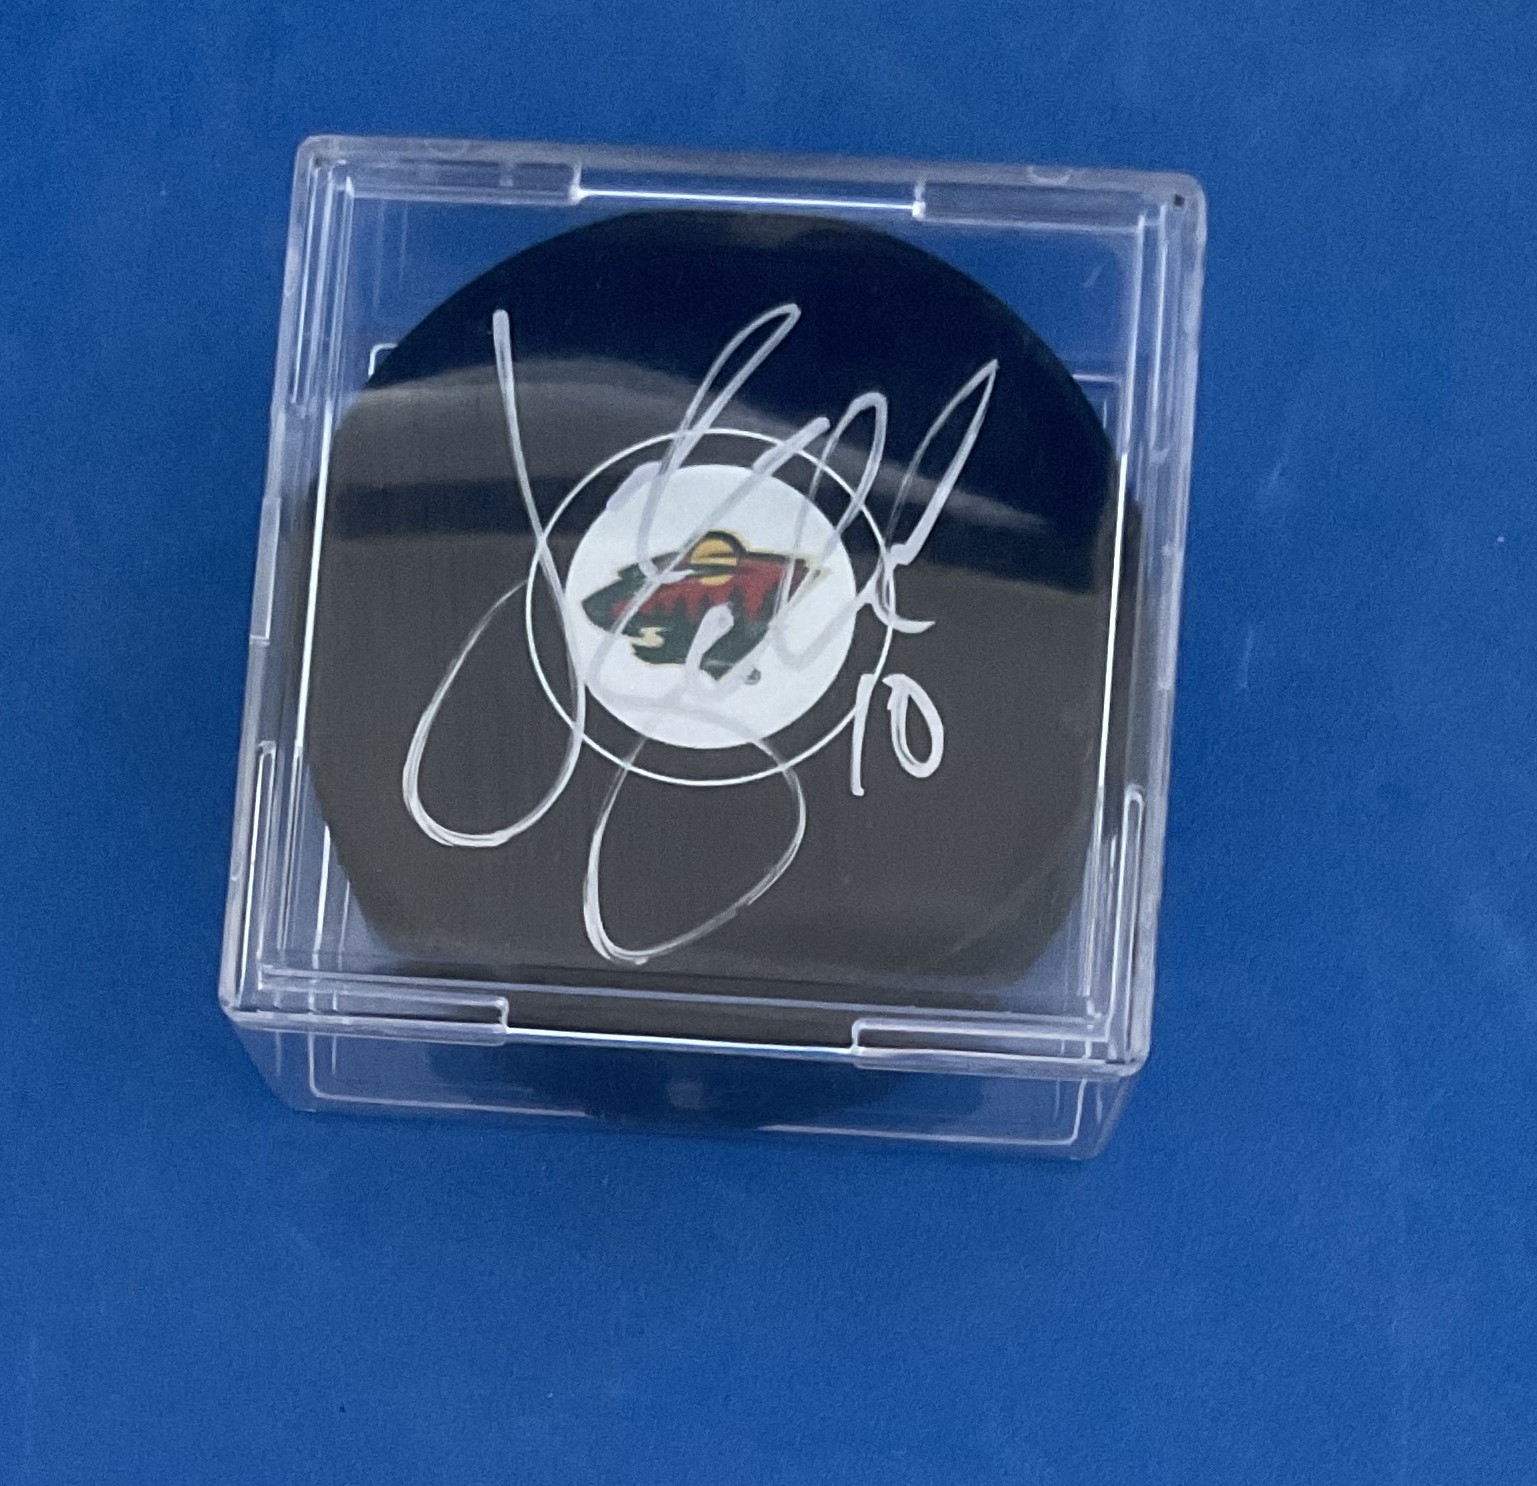 American Ice Hockey Player Jordan Schroeder Signed Official NHL Puck. Signed in silver ink. Housed - Image 2 of 2